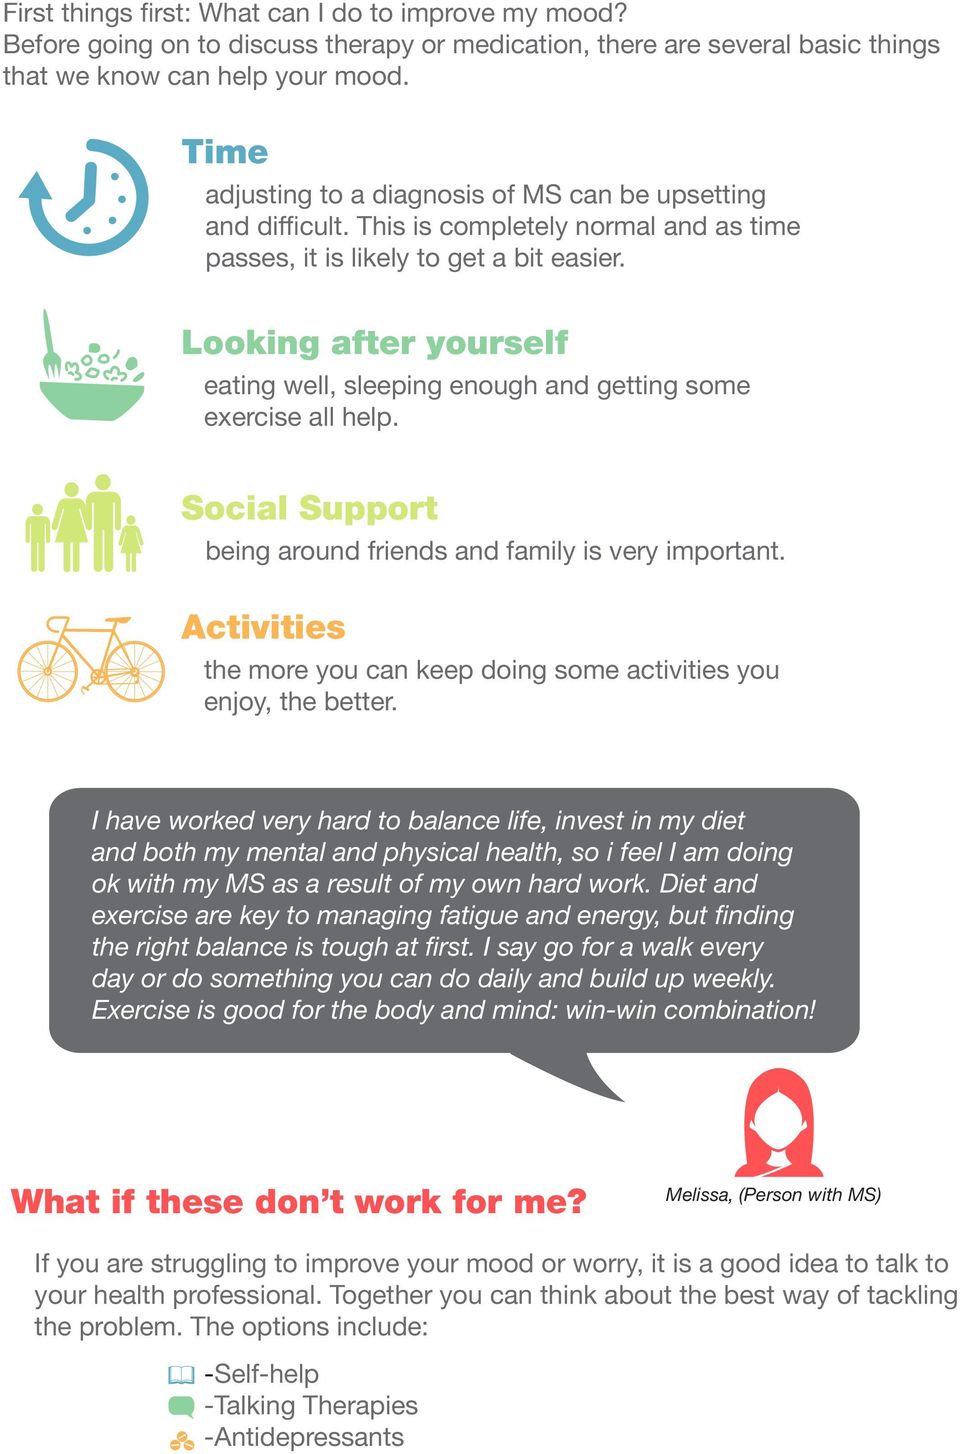 Looking after yourself eating well, sleeping enough and getting some exercise all help. Social Support being around friends and family is very important.